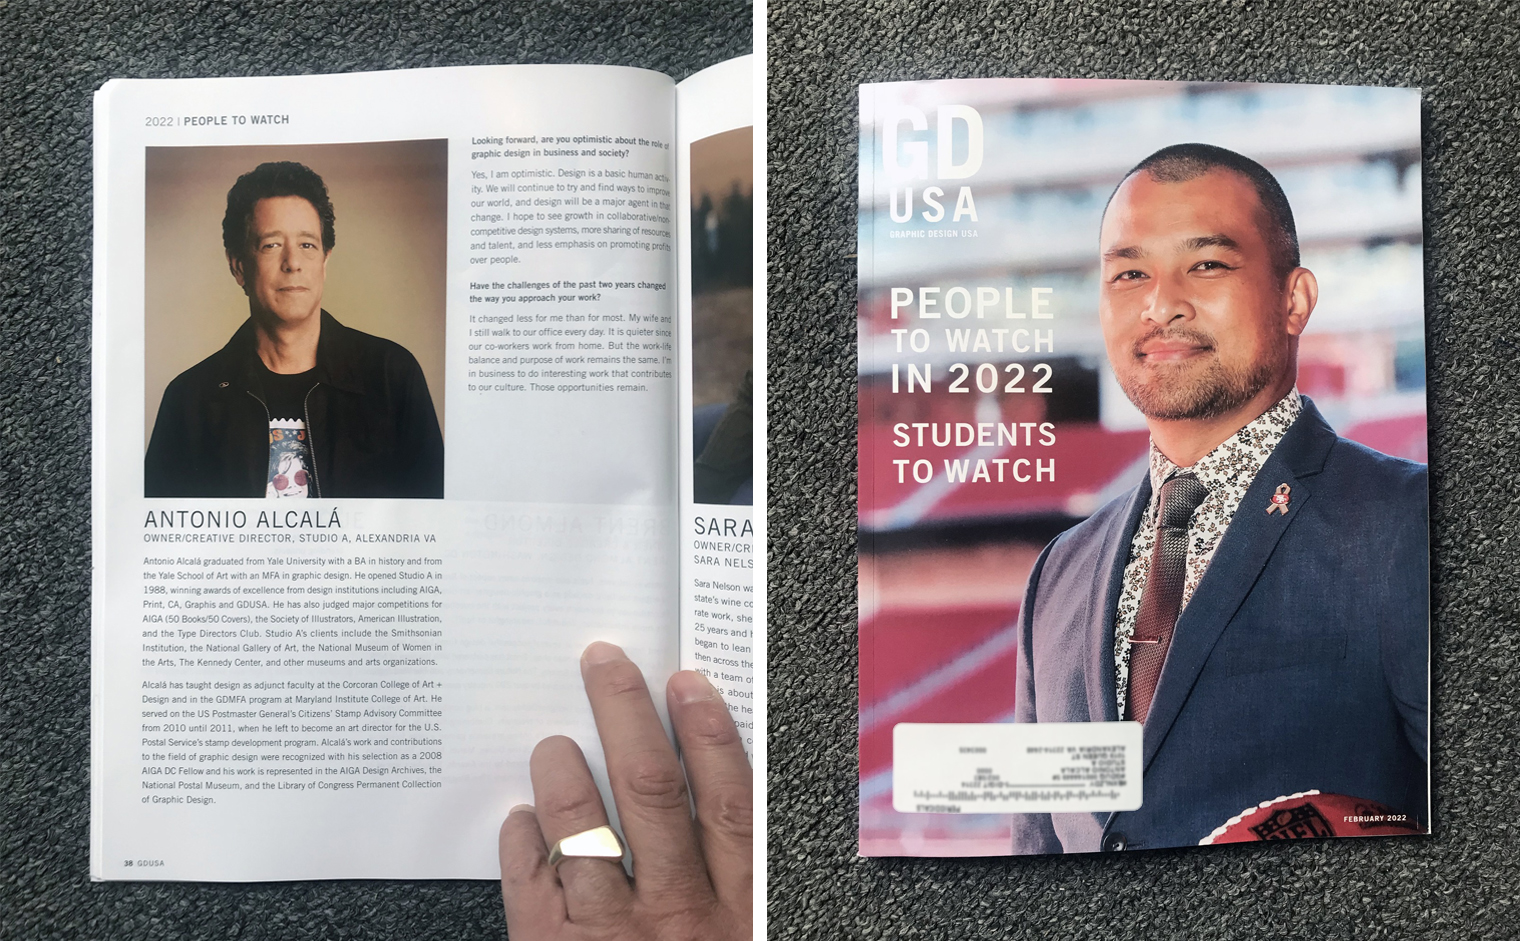 A pair of photos. At left is Antonio Alcala and at right is the cover of the GD/USA issue "People to Watch 2022"